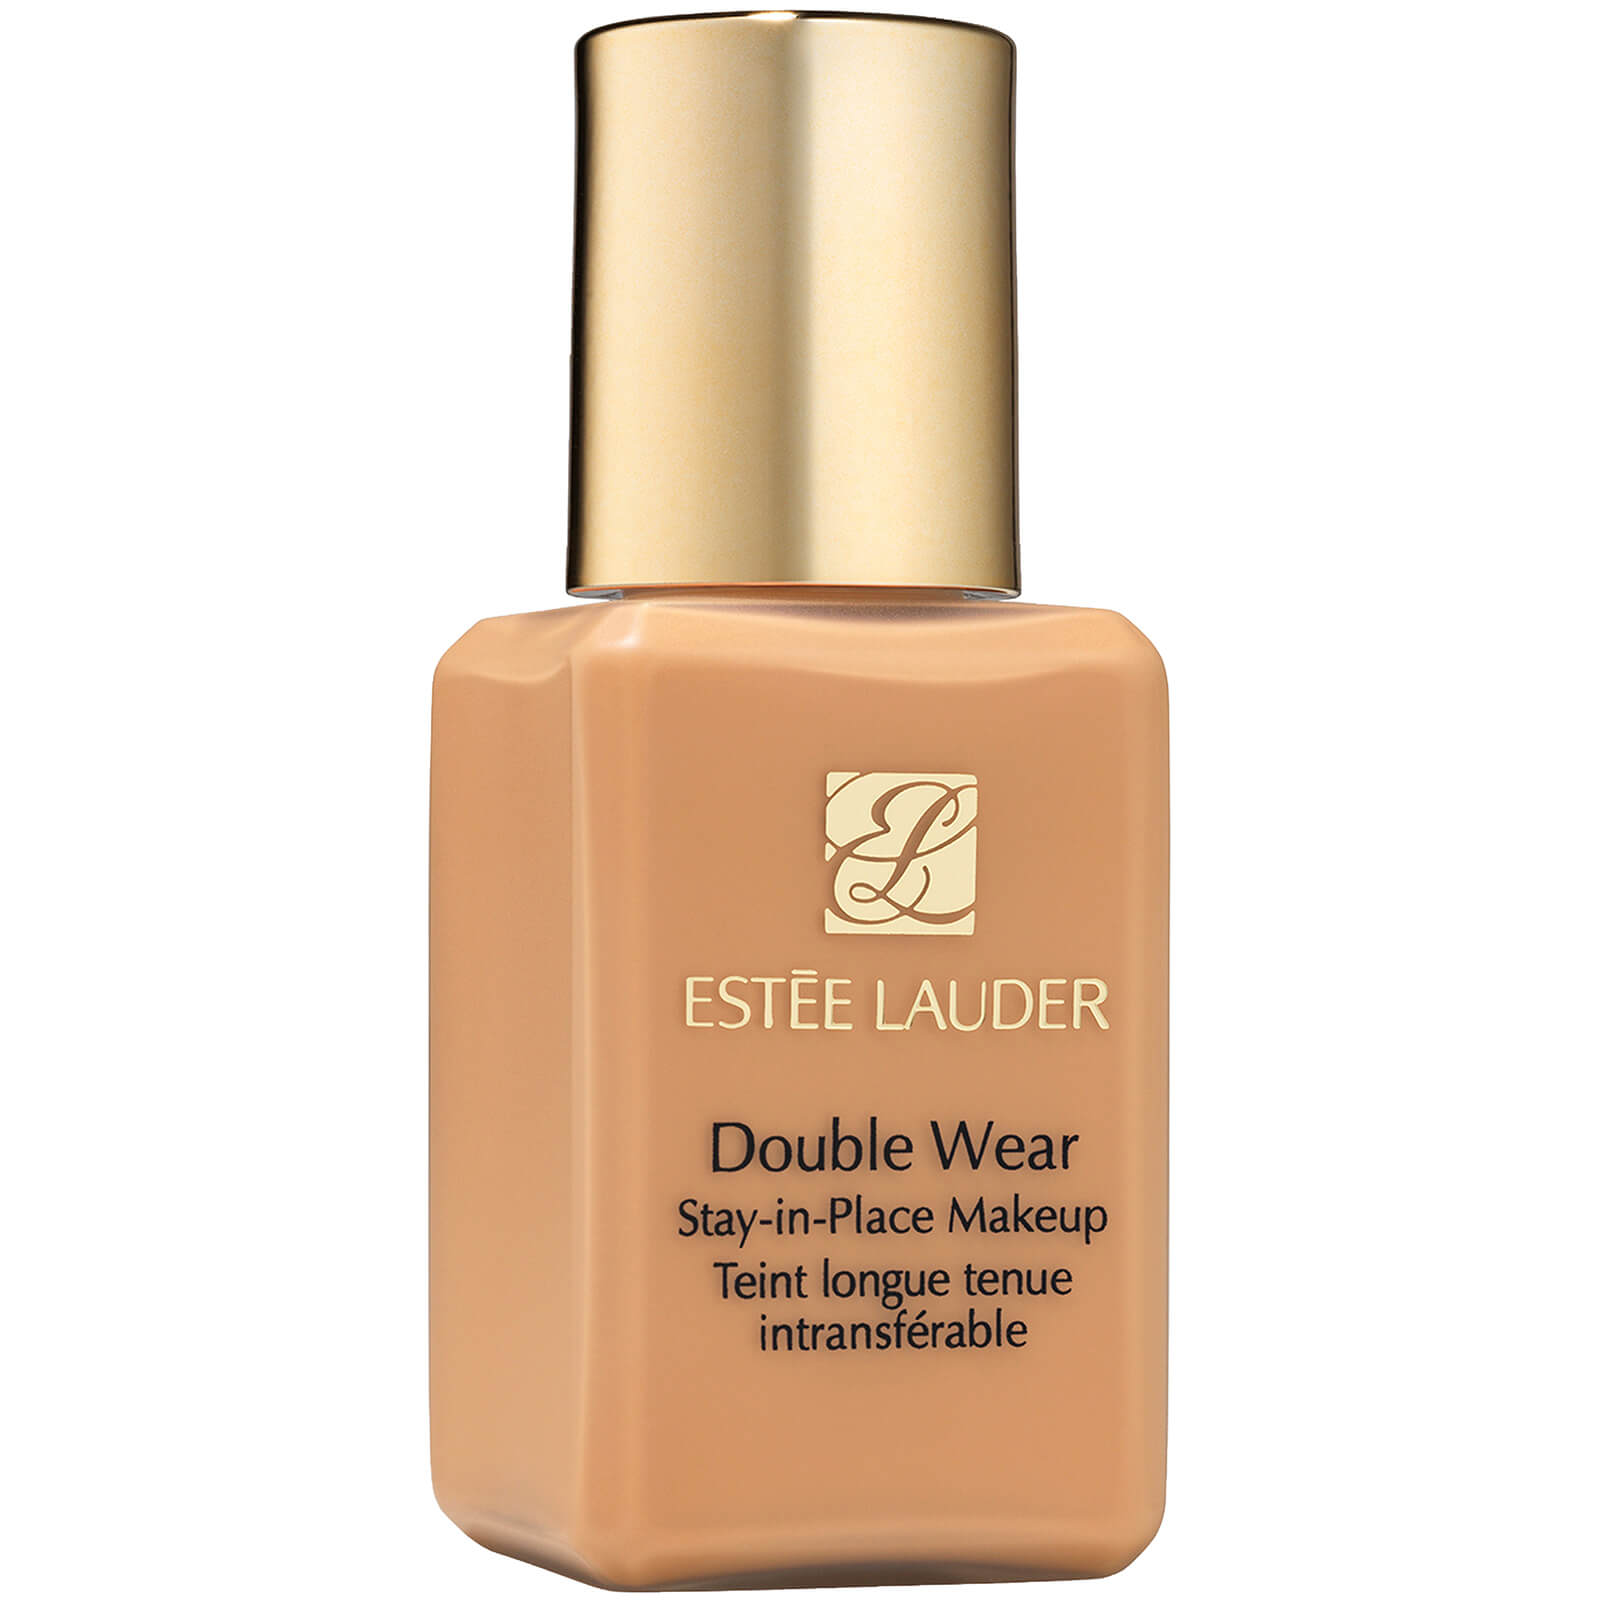 Estée Lauder Double Wear Stay-in-Place Makeup 15ml (Various Shades) - 3W1 Tawny